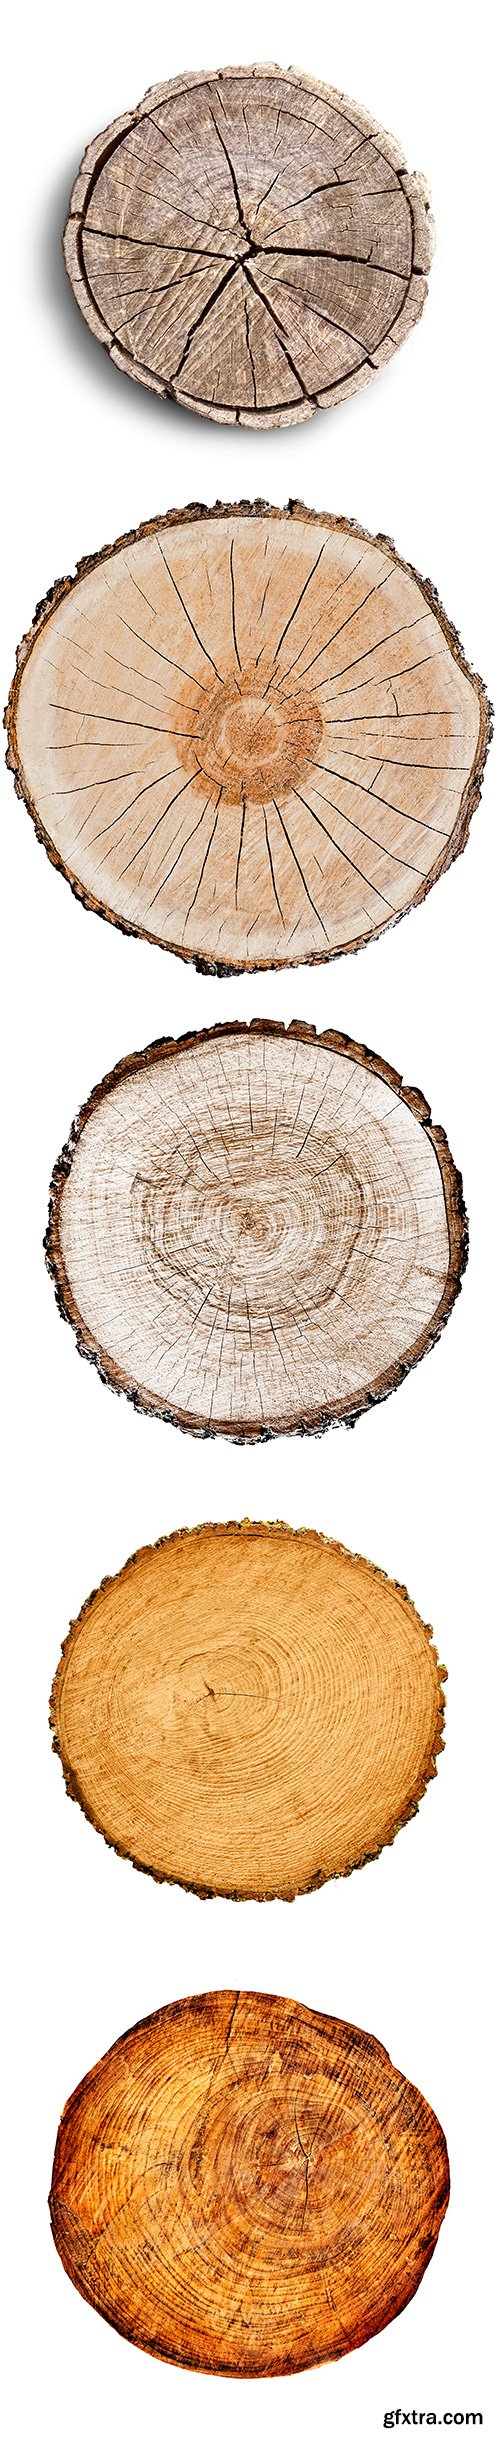 Smooth Cross Section Tree Stump Slice Isolated - 8xJPGs